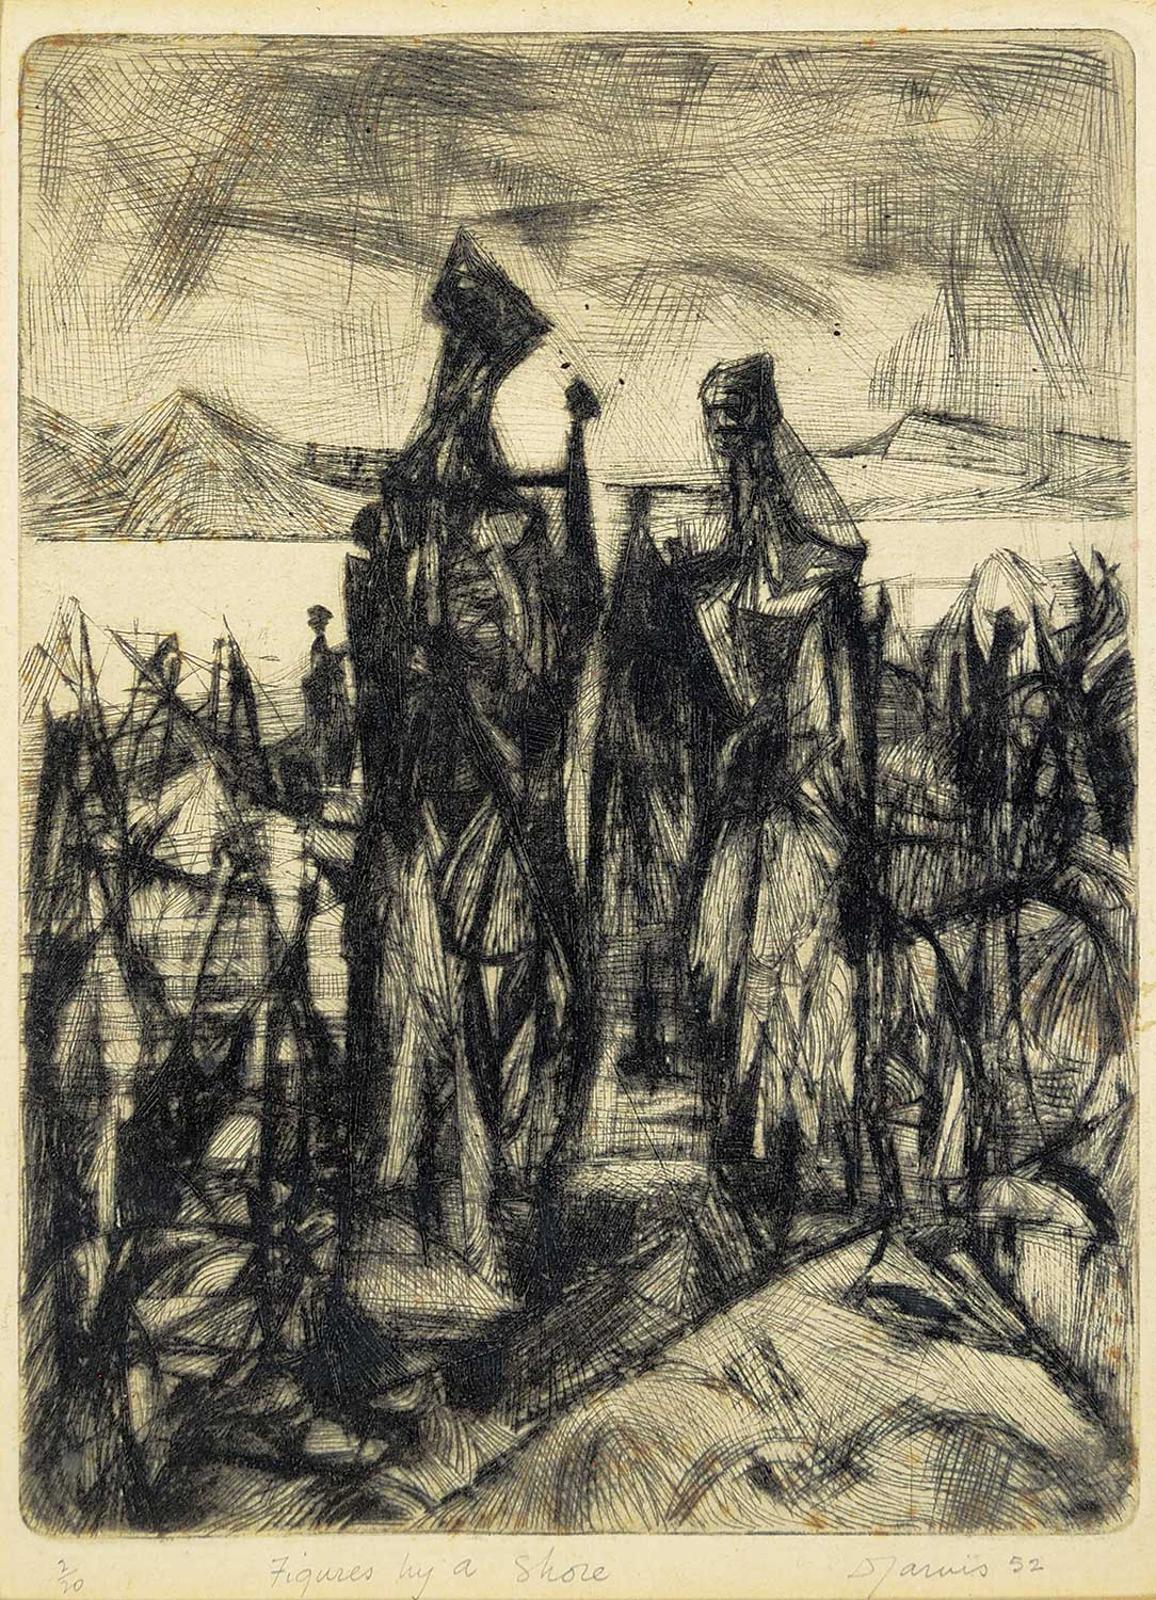 Donald Alvin Jarvis (1923-2001) - Figures by a Shore  #2/20